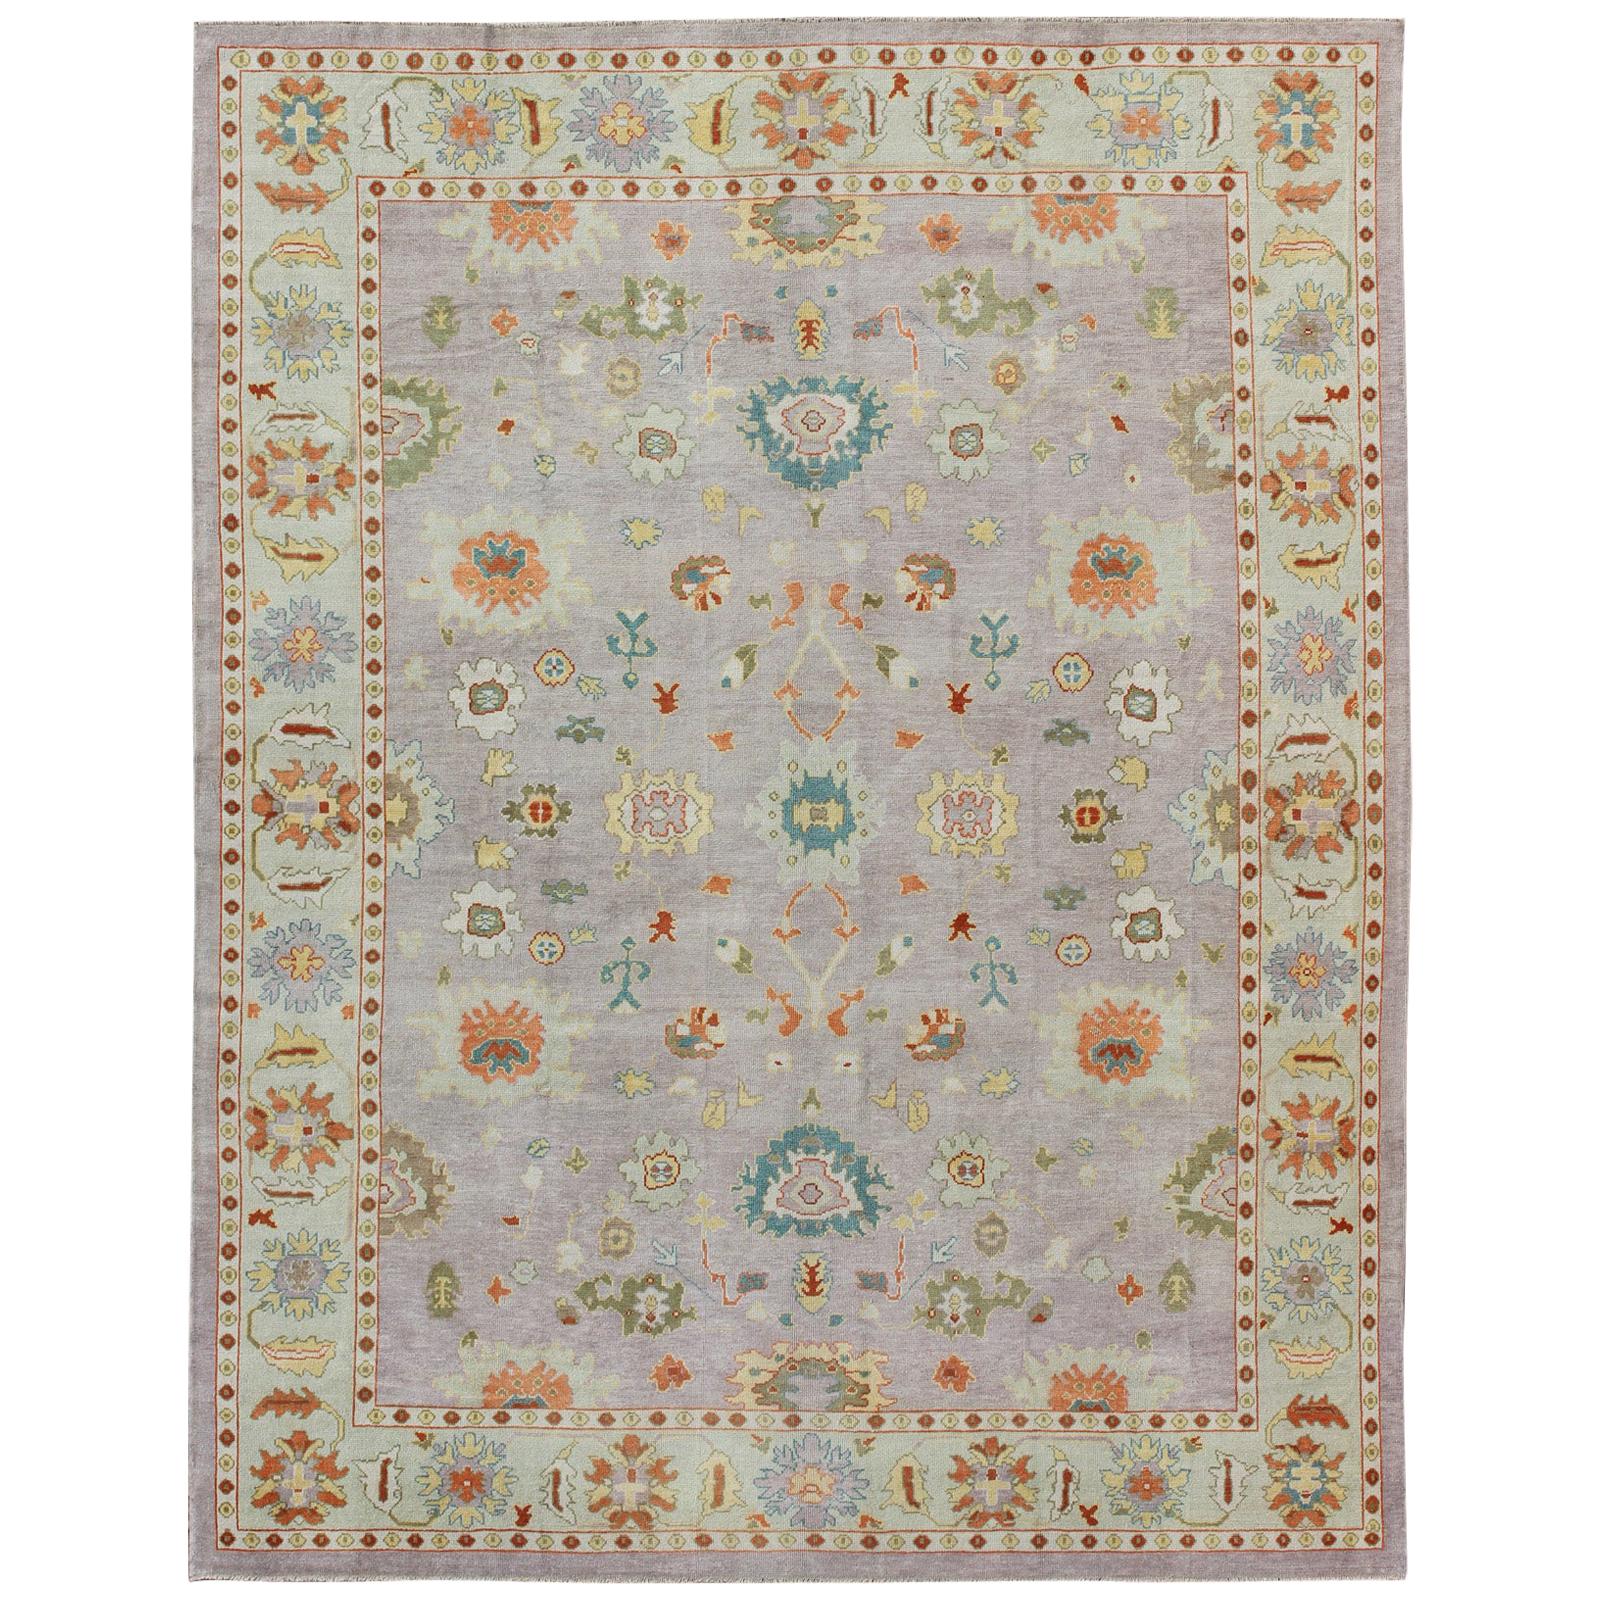 Colorful Turkish Oushak Rug With All-Over Flower Design in Lavender, Light Green